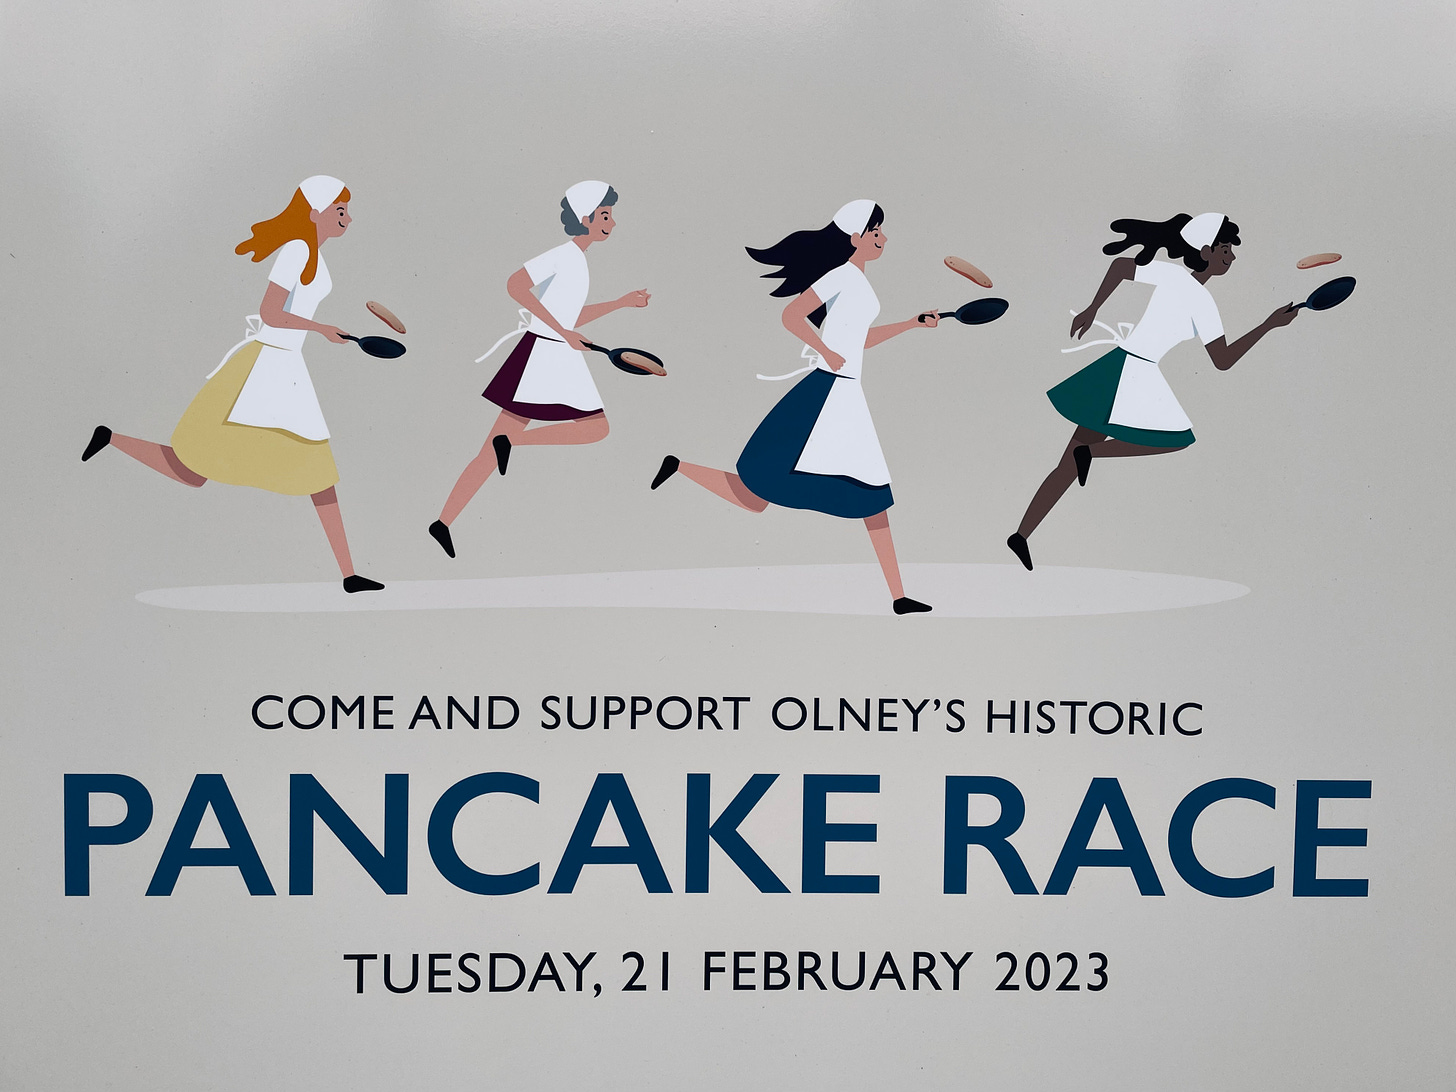 Come and support Olney’s historic pancake race poster